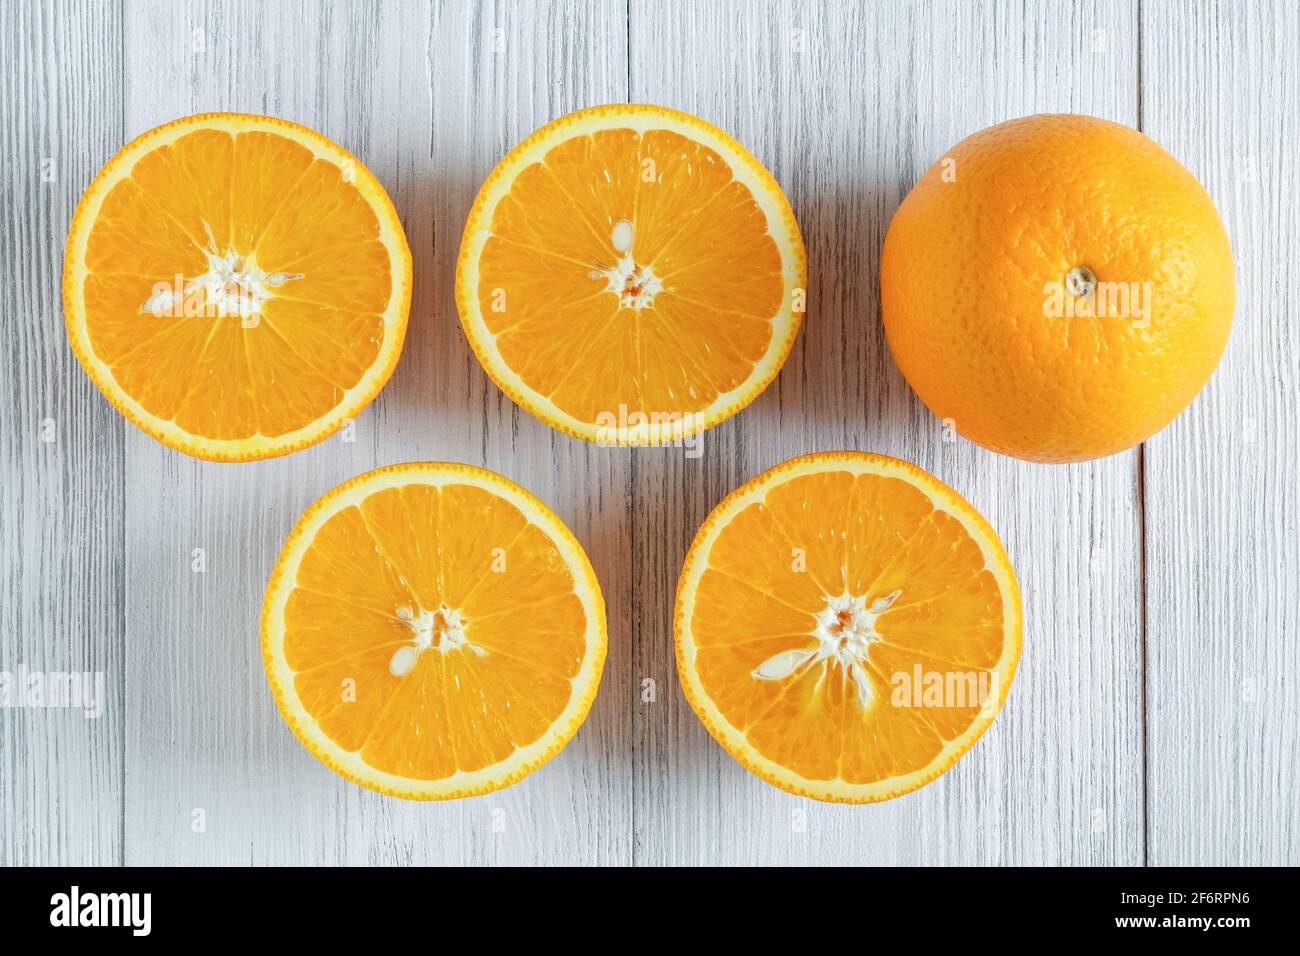 Close-up of whole and sliced oranges on a light wooden surface. Selective focus. Stock Photo